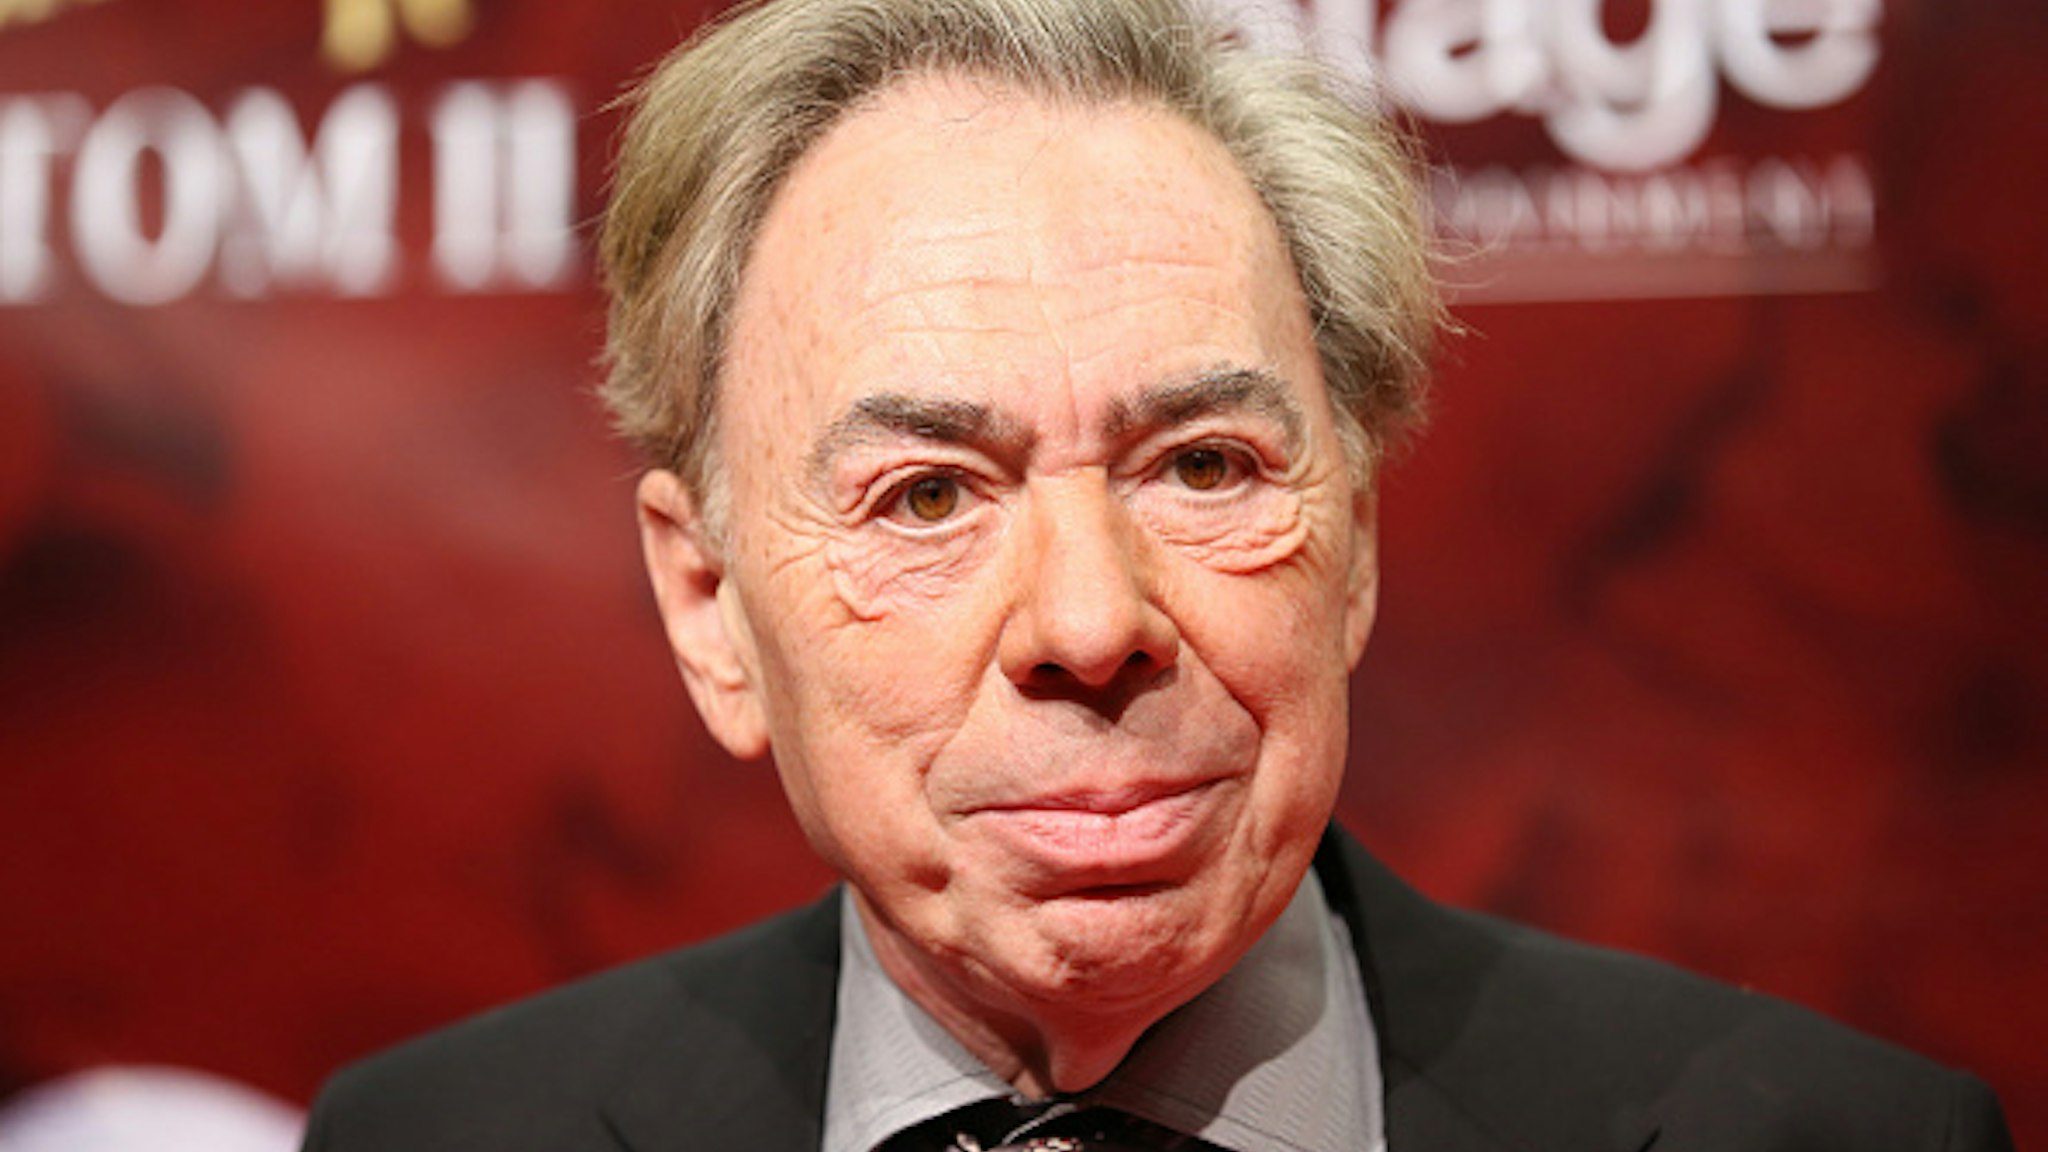 British composer Andrew Lloyd Webber arrives at the Stage Operettenhaus for the premiere of the musical Love Never Dies, in Hamburg, Germany, 15 October 2015. The sequel to The Phantom of the Opera had its German premiere on Thursday. PHOTO: CHRISTIAN CHARISIUS/DPA | usage worldwide